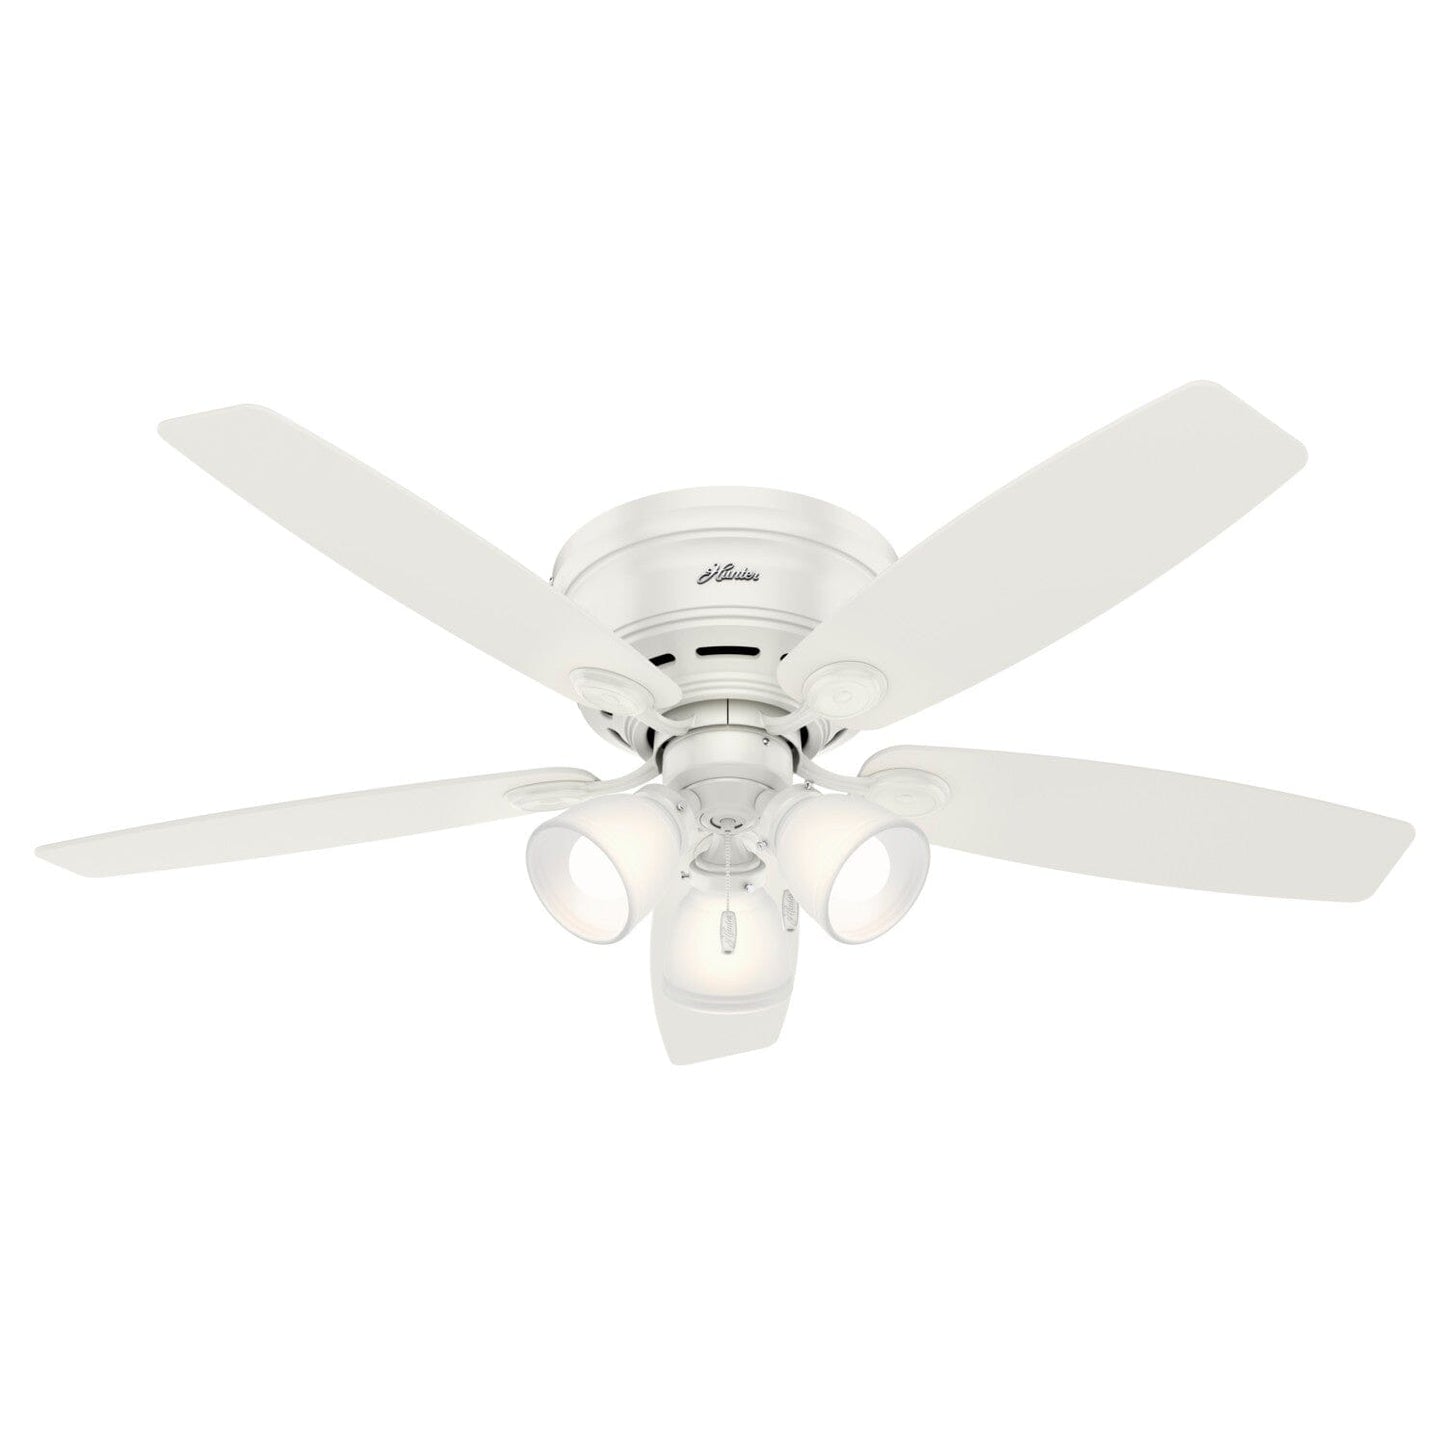 Low Profile with LED Light 52 in Ceiling Fans Hunter Fresh White - Fresh White 